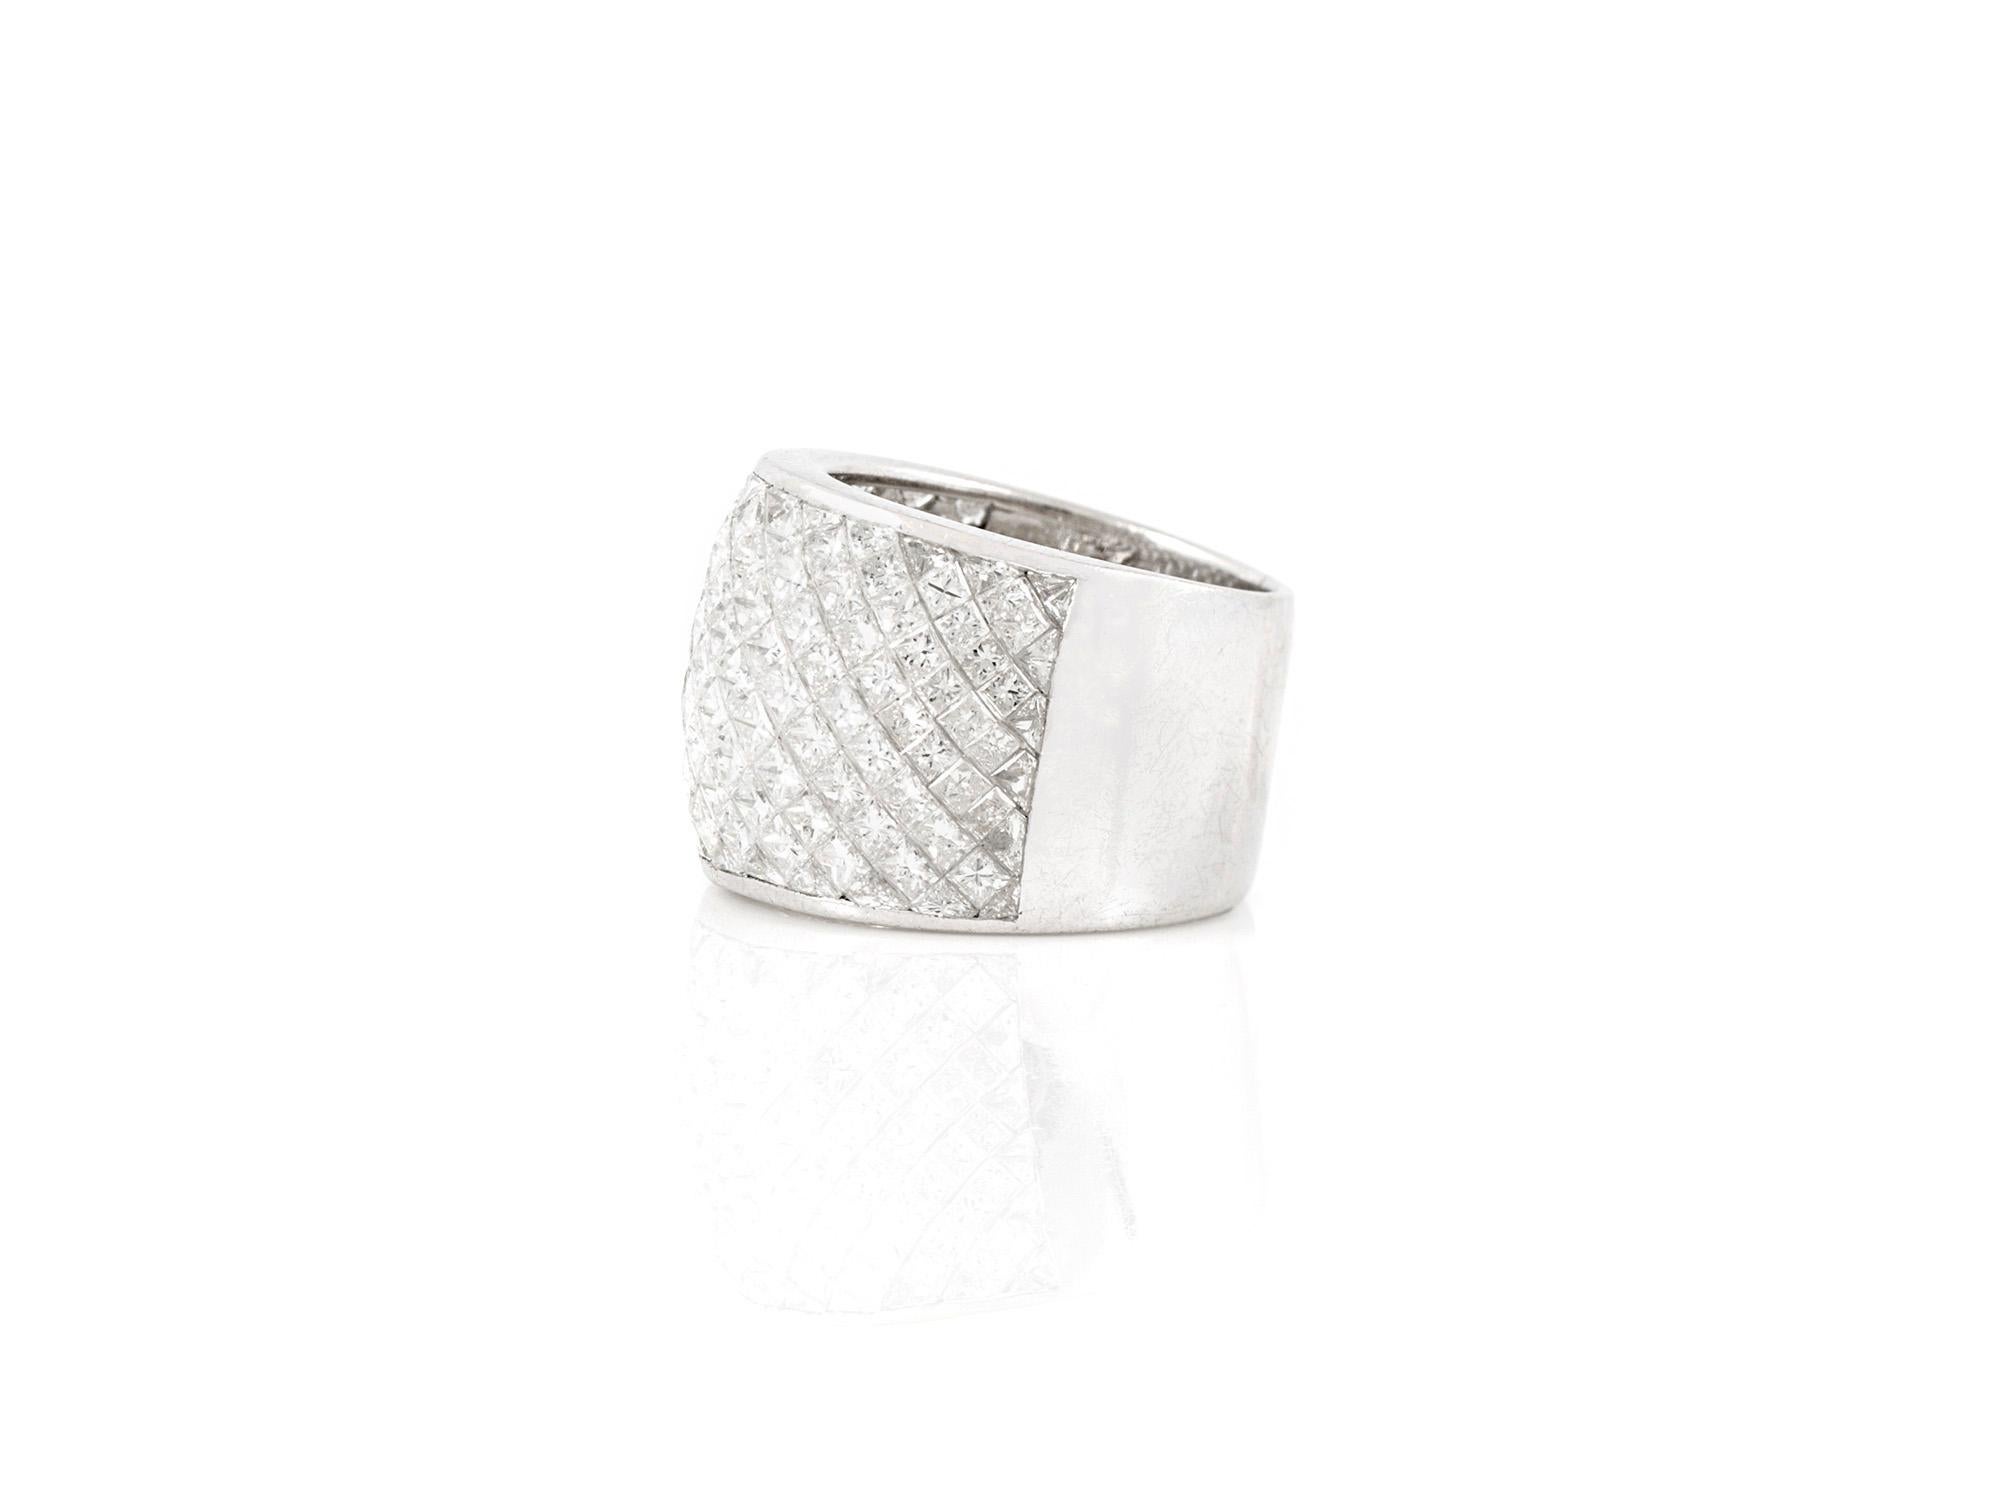 The beautiful ring is finely crafted in platinum with square cut diamonds weighing approximately a total of 6.65 carats.
Invisible setting.
Carat 2000.